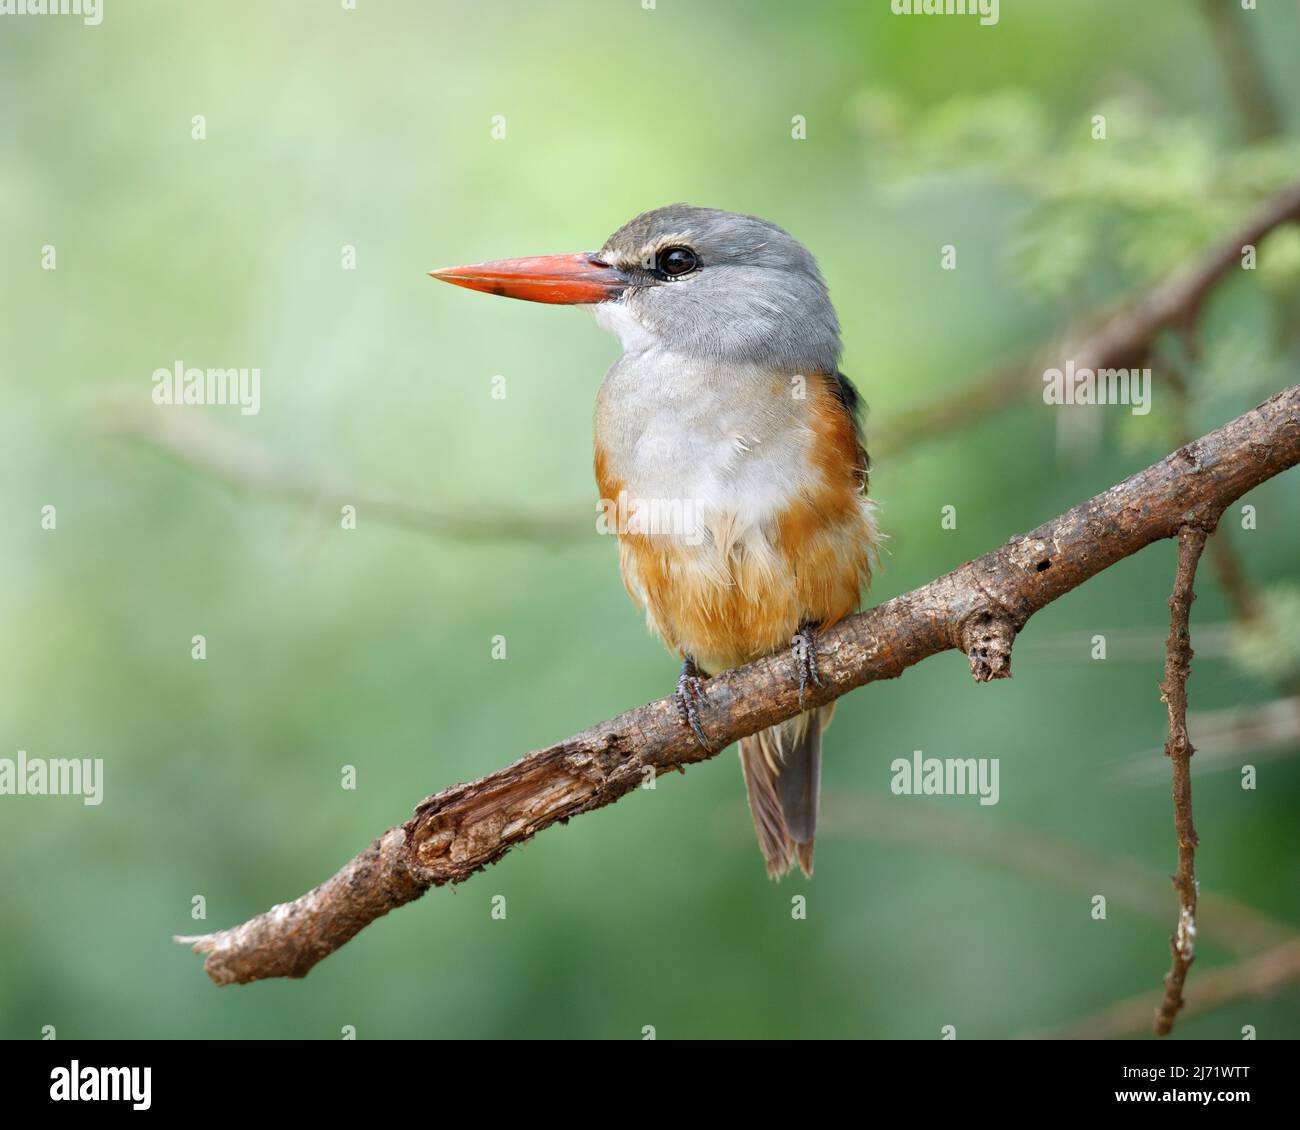 Grey-headed kingfisher (Halcyon leucocephala) perched on branch. and looking to the side Stock Photo